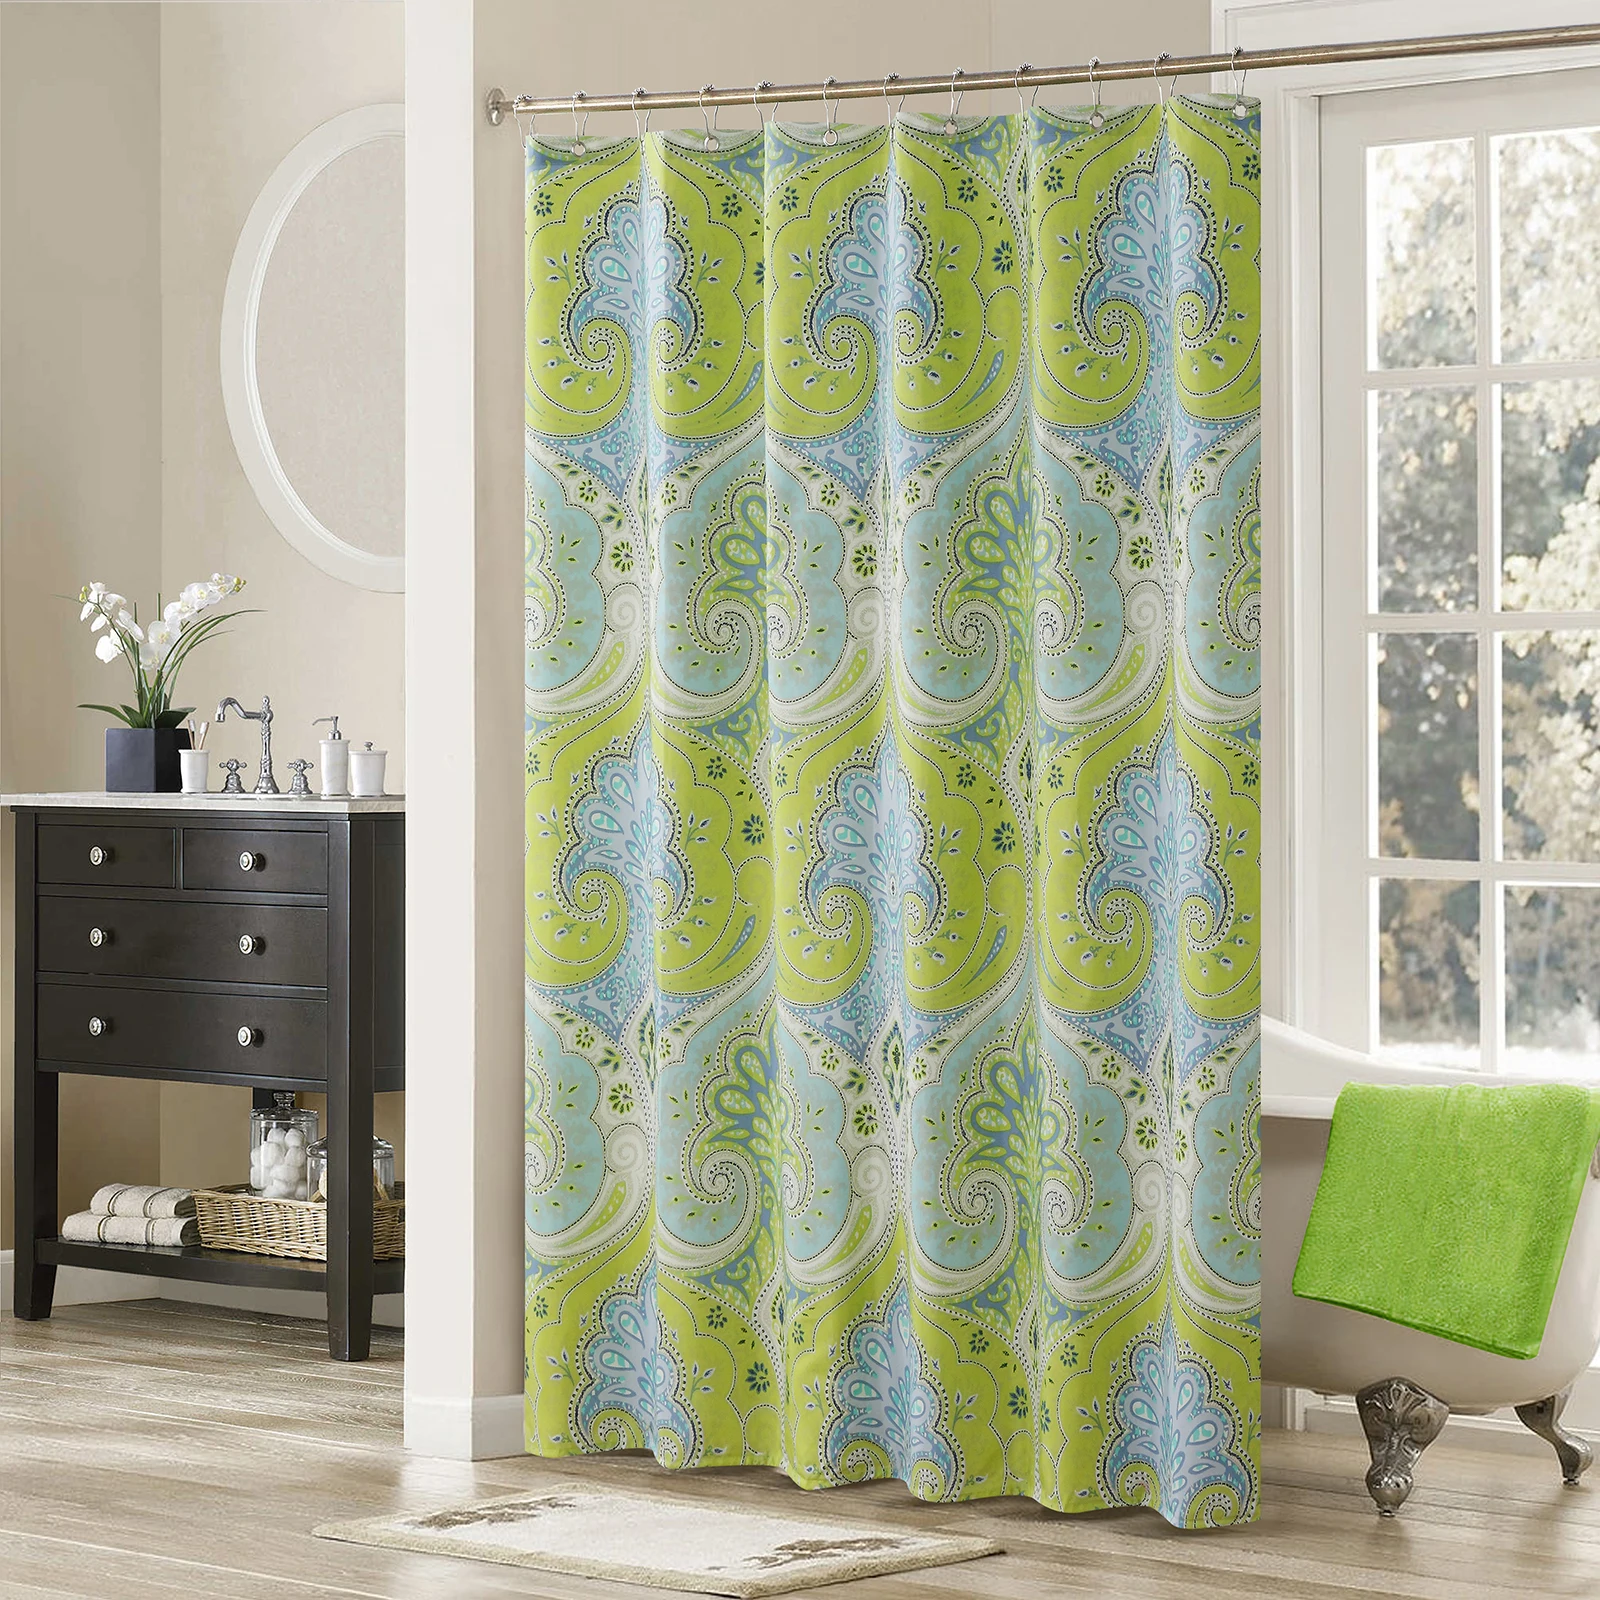 Jaipur Blue Paisley Polyester Waterproof Printed Bright Fabric Fresh Decoratived Modern Green Shower Curtain